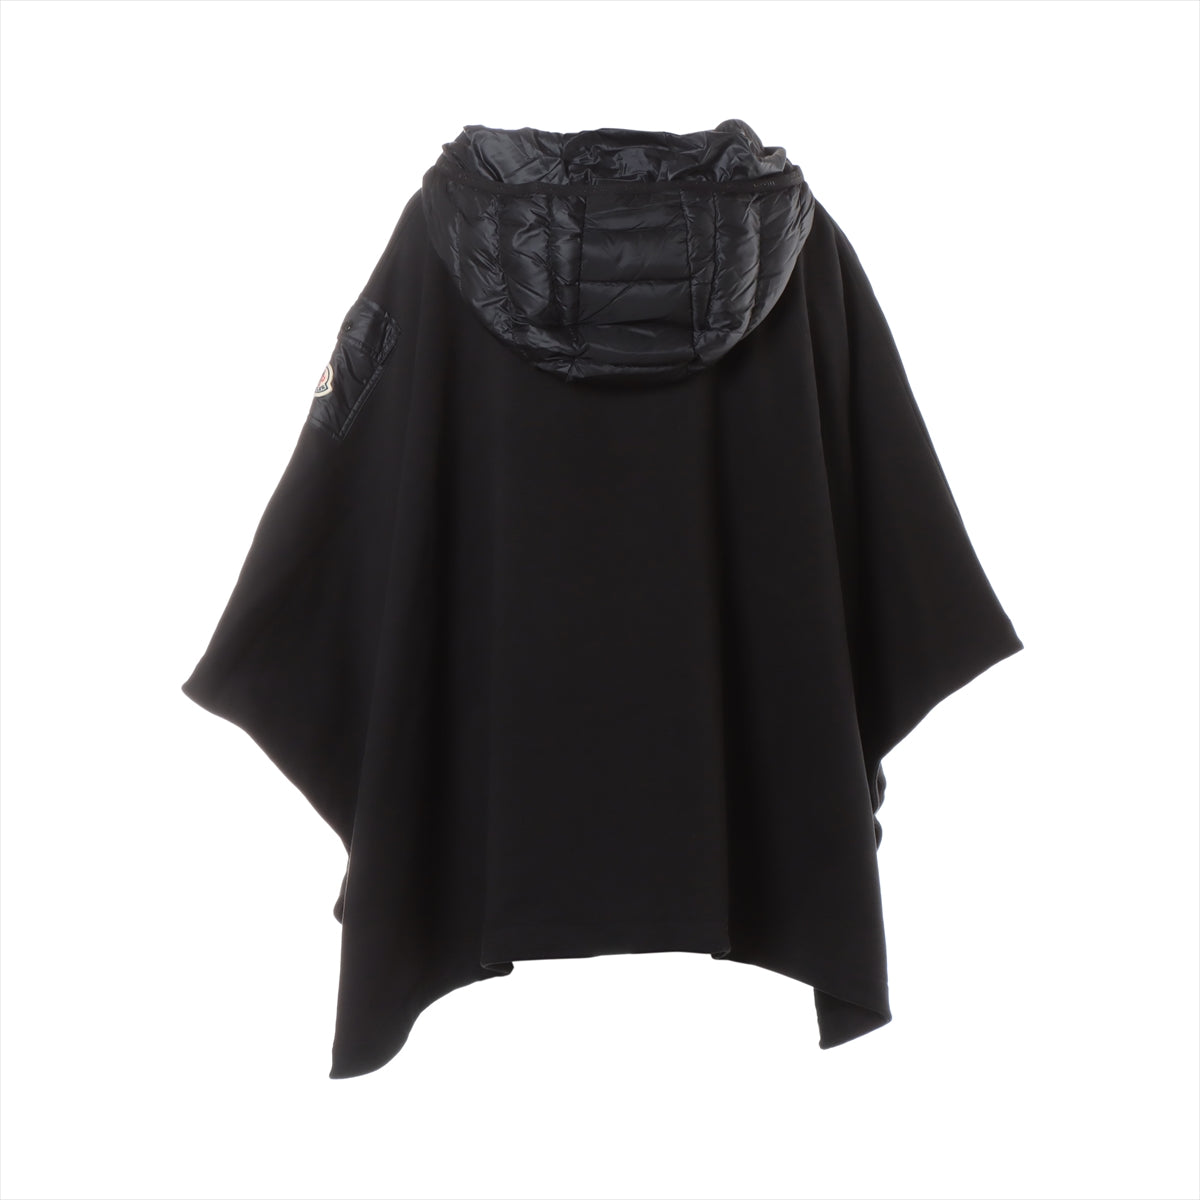 Moncler 21 years Cotton & nylon Poncho UNI Unisex Black  Down material on the hood H20933G00008